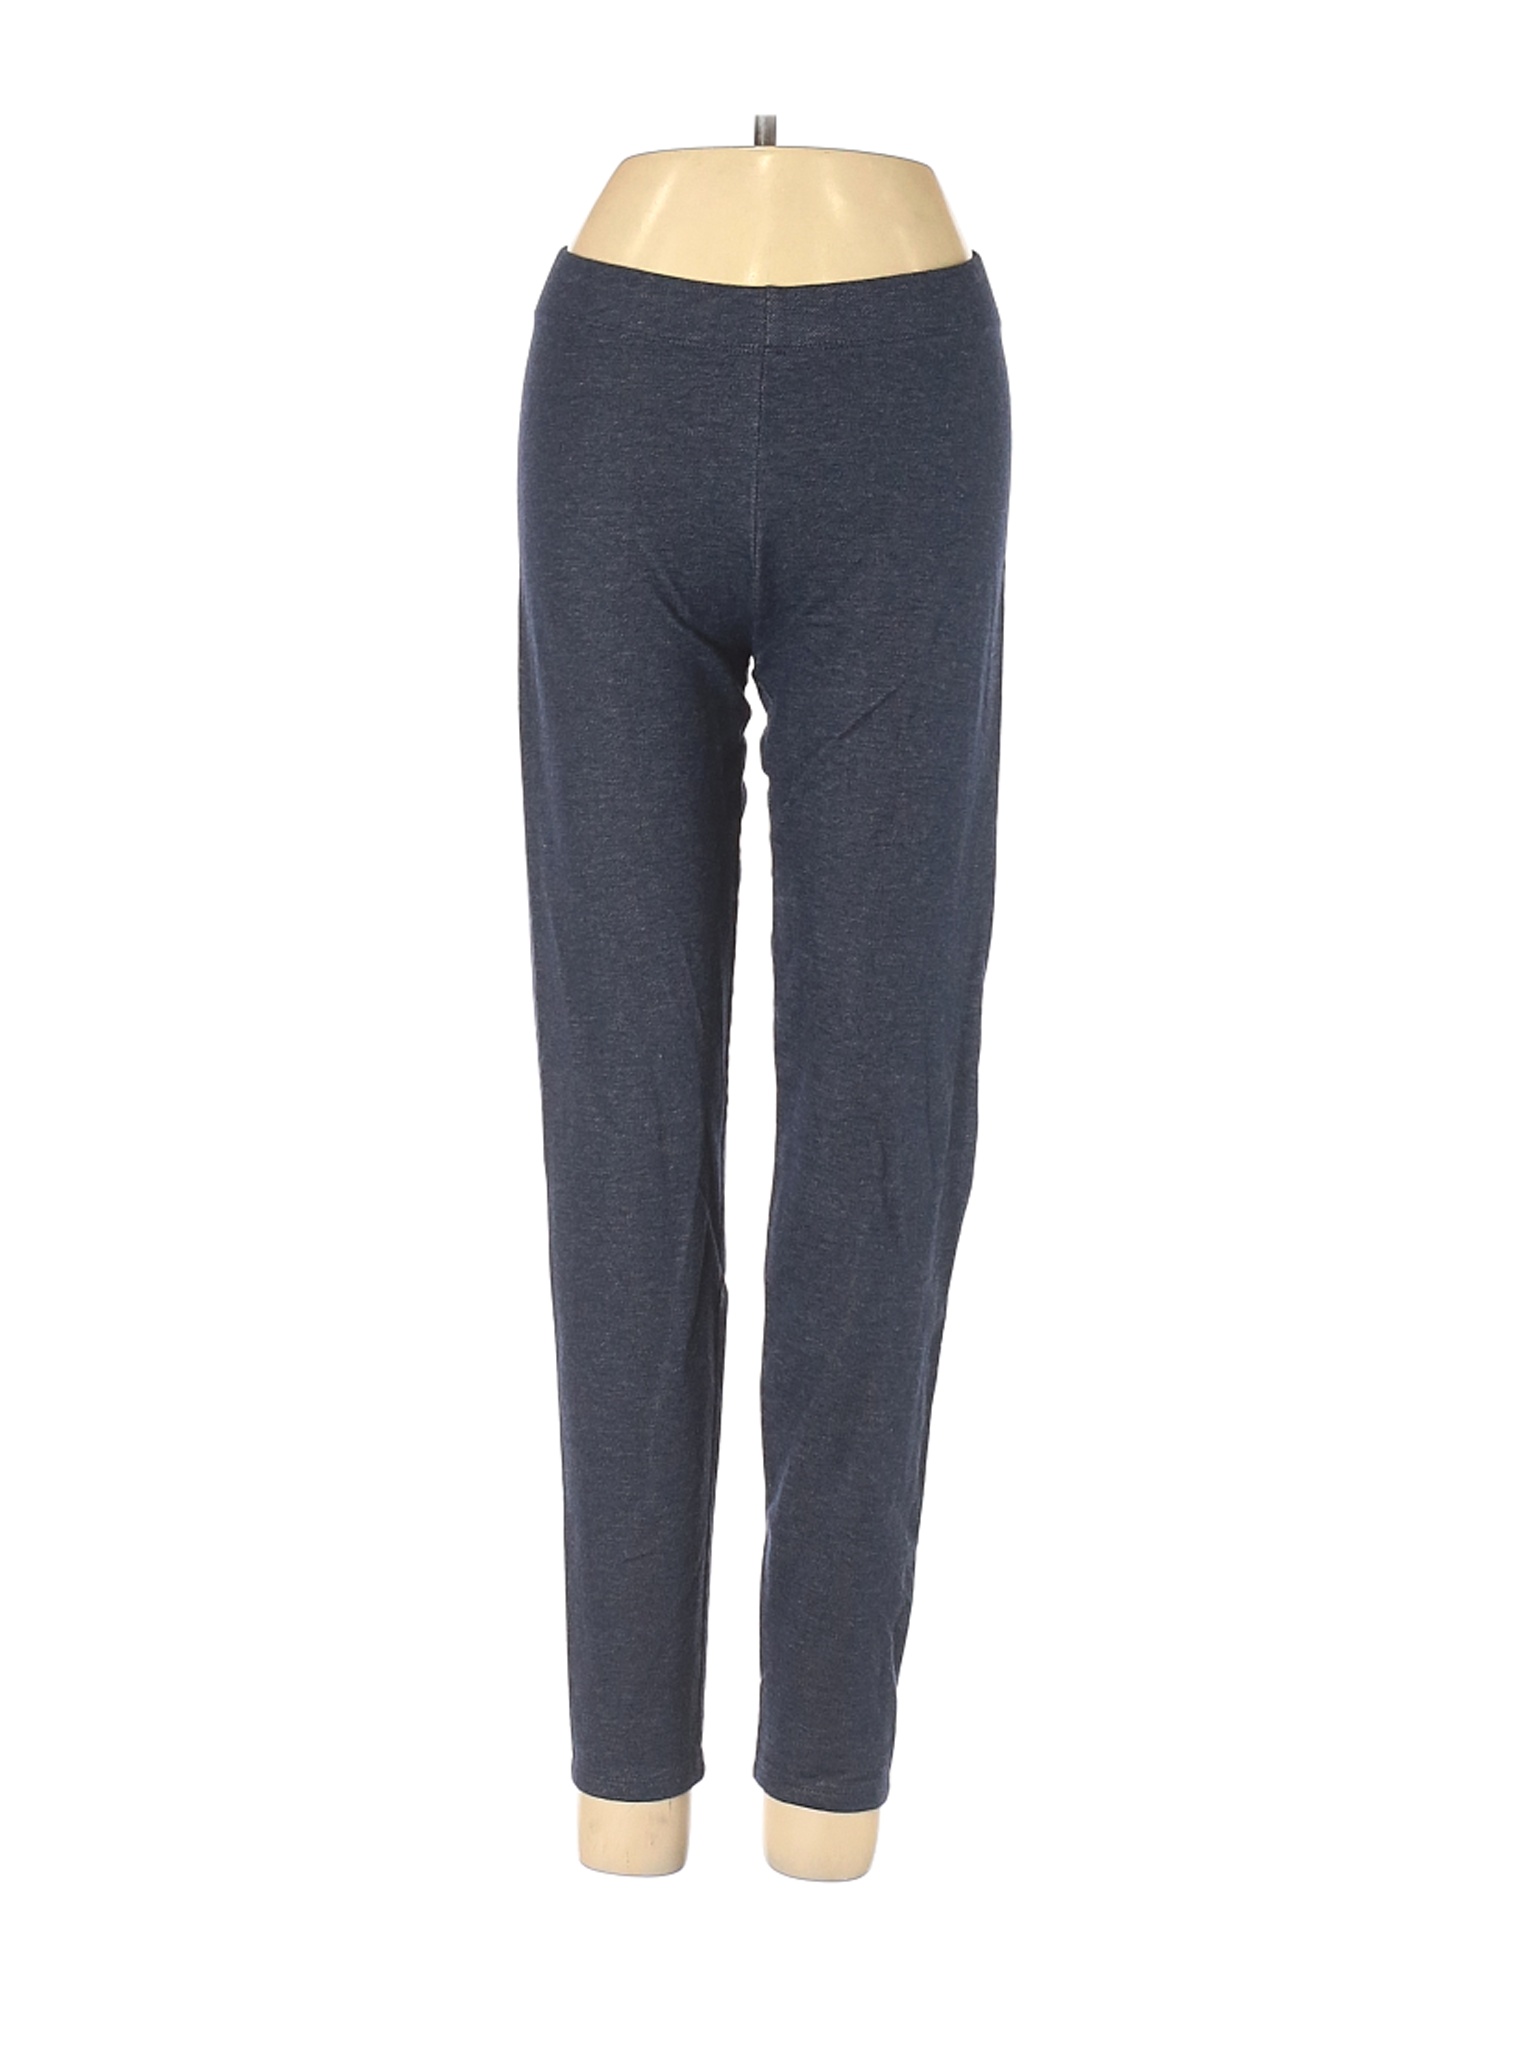 Lou & Grey, Pants & Jumpsuits, New Lou Grey Ponte High Waist Leggings In  Navy Blue Size Xs